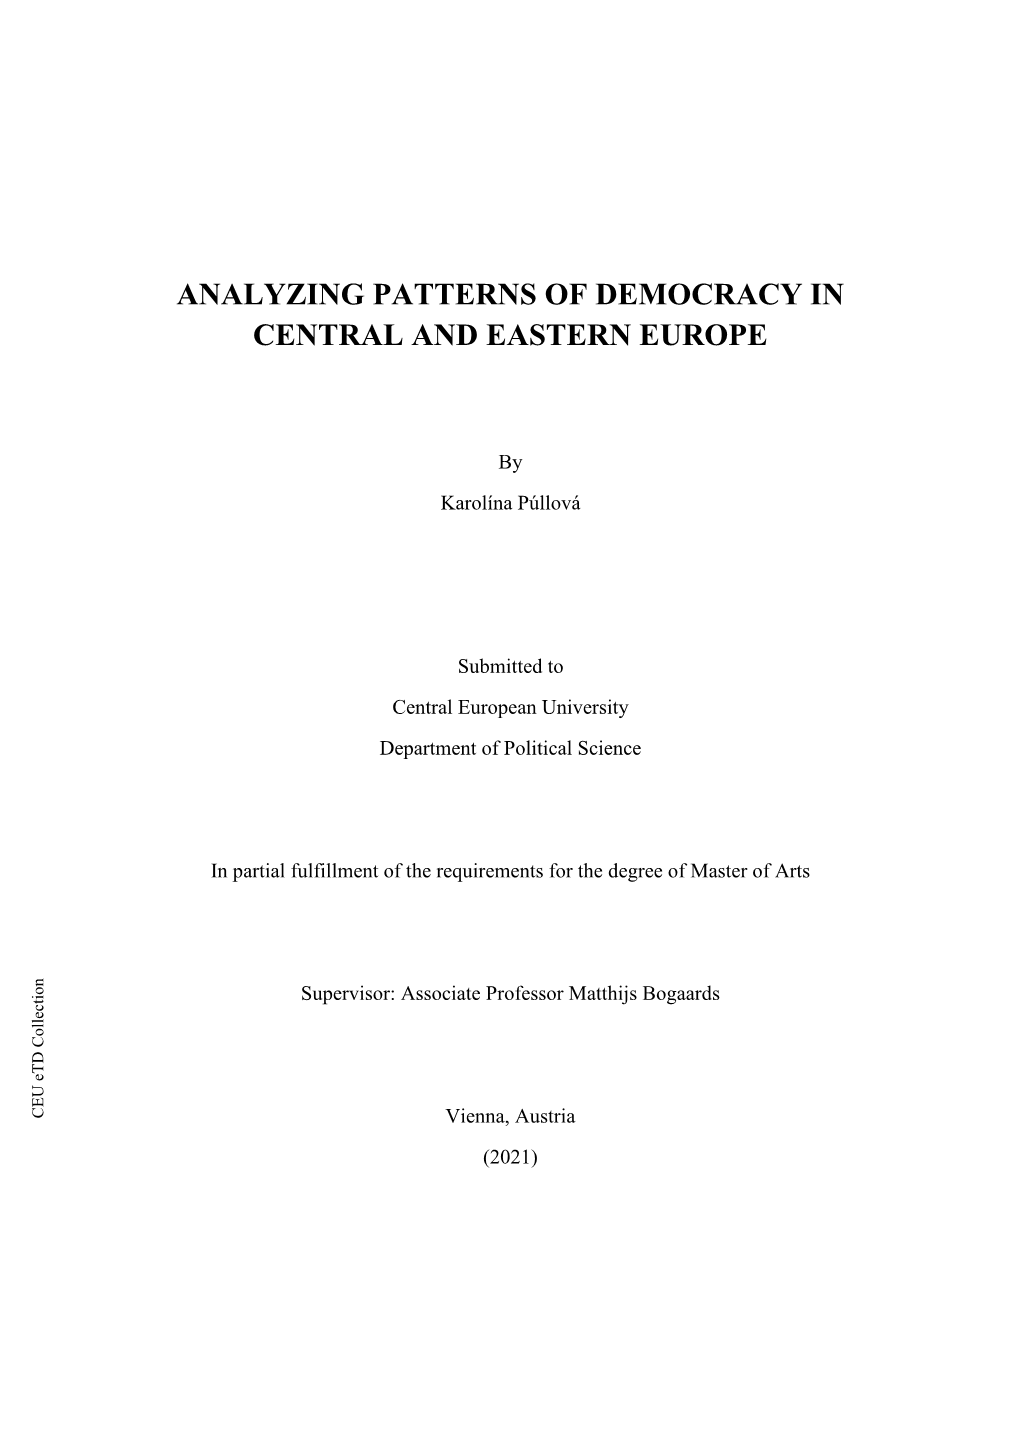 Analyzing Patterns of Democracy in Central and Eastern Europe